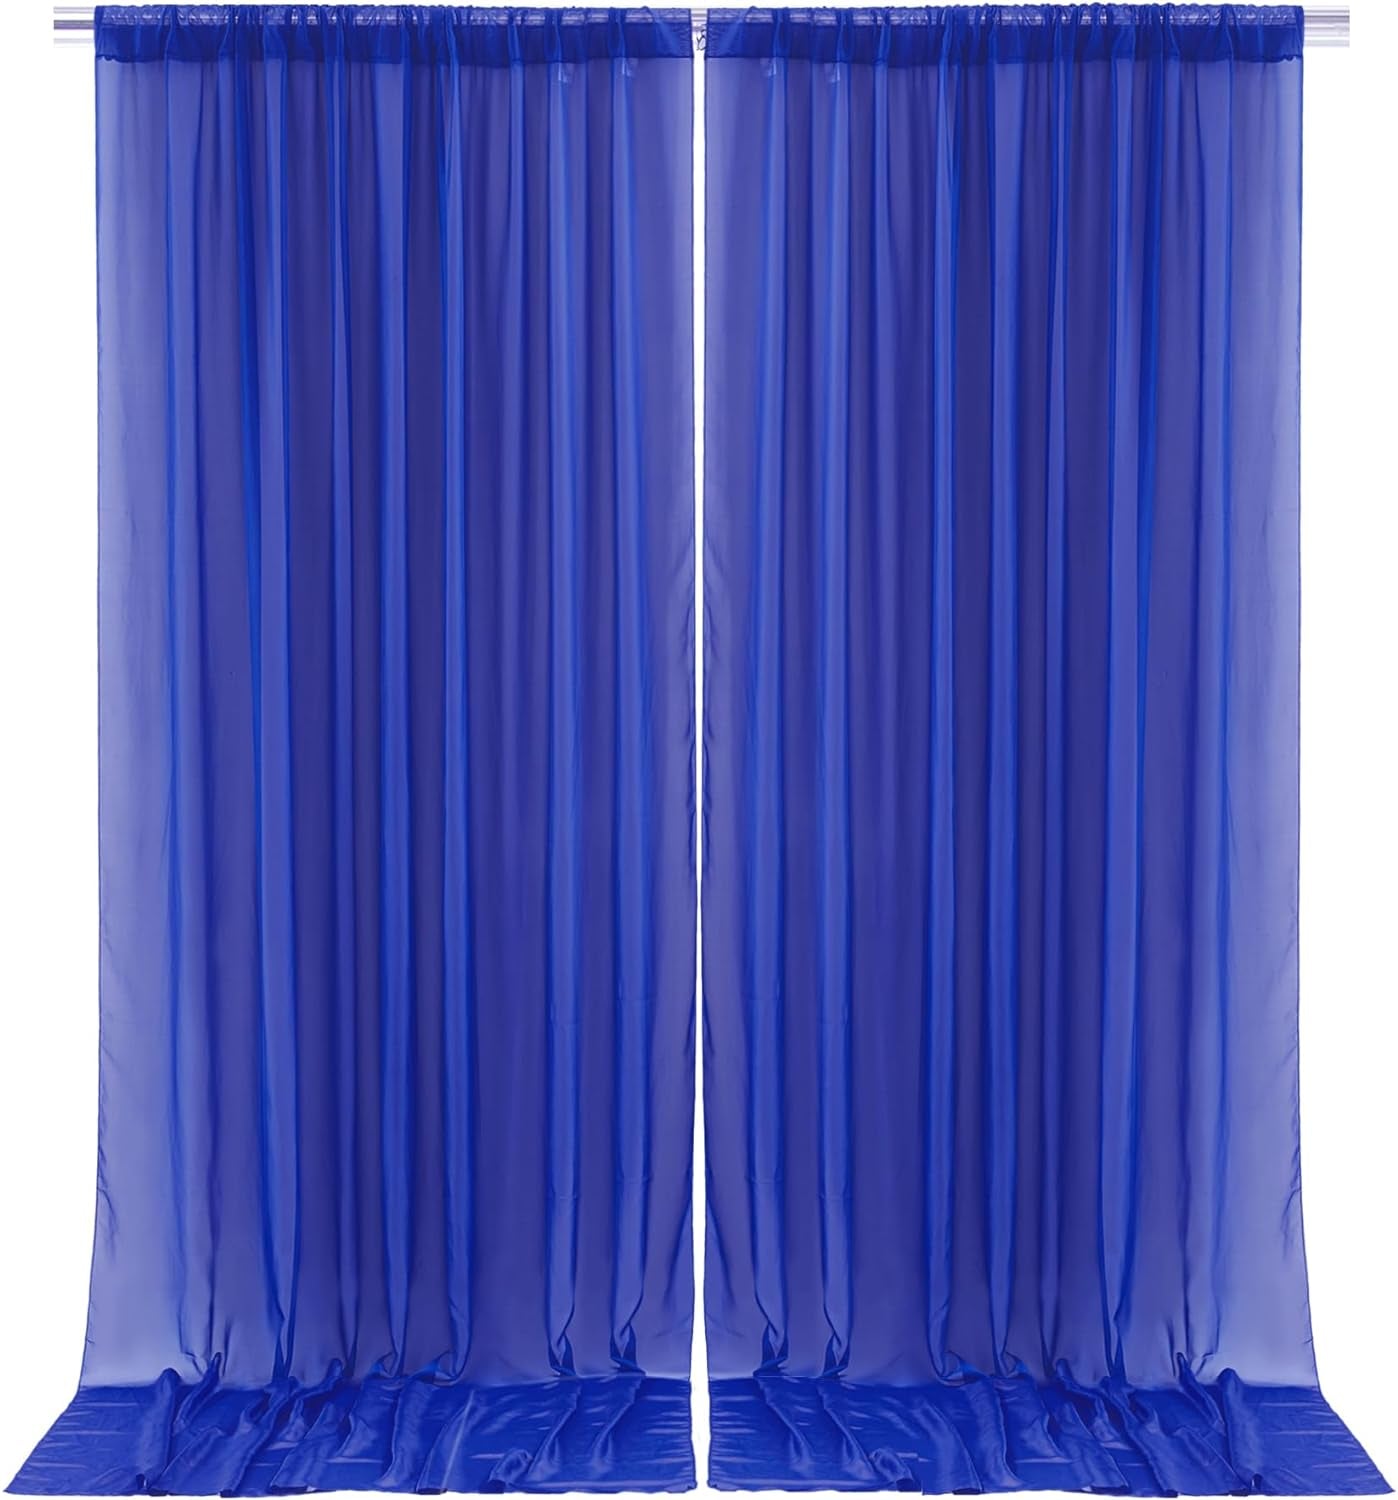 10Ft X 10Ft White Chiffon Backdrop Curtains, Wrinkle-Free Sheer Chiffon Fabric Curtain Drapes for Wedding Ceremony Arch Party Stage Decoration  Wish Care Royal Blue  